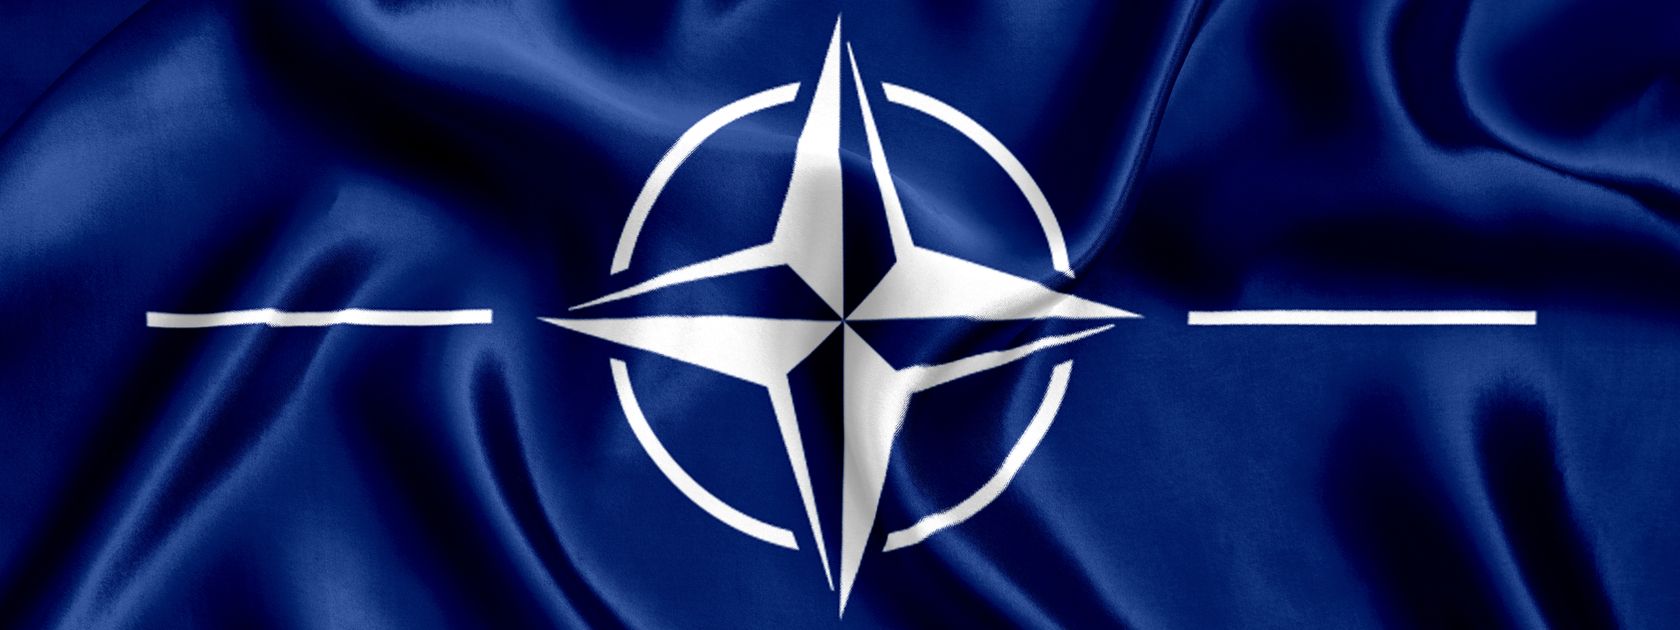 The white four point NATO star on a blue background